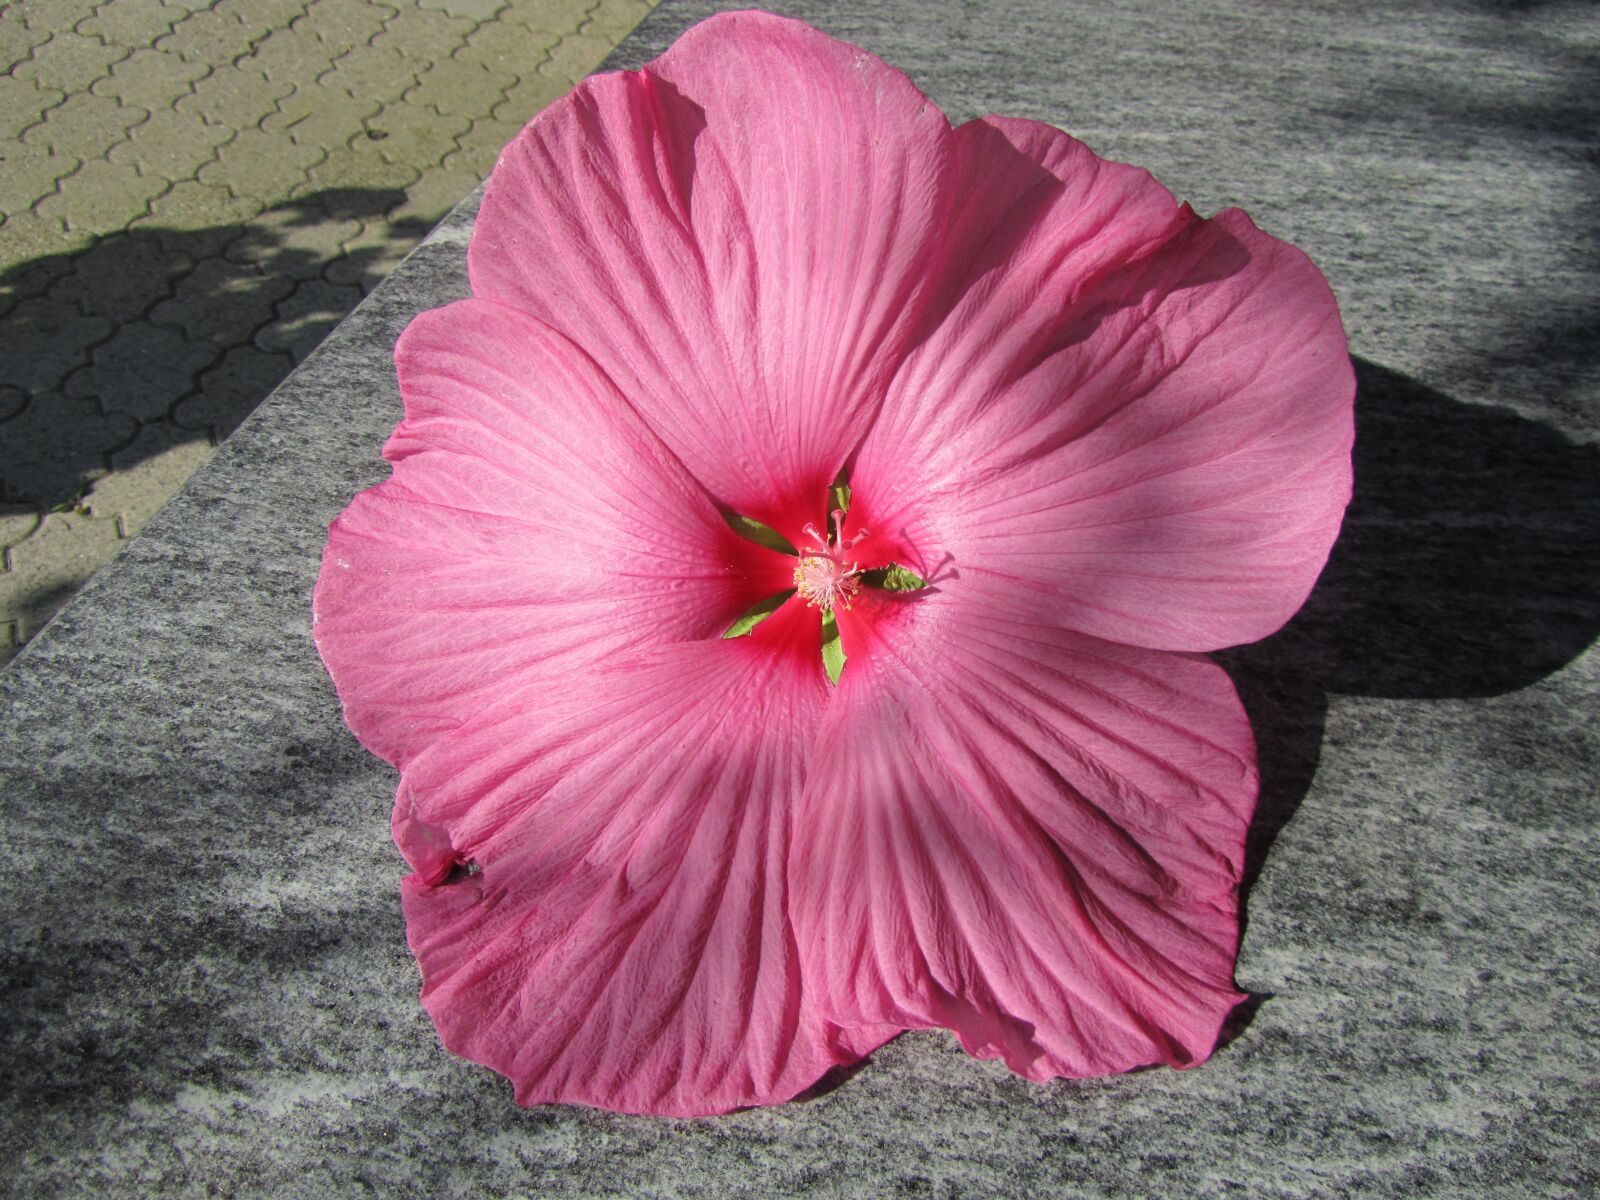 Canon PowerShot SX210 IS sample photo. Flower, pink, nature photography